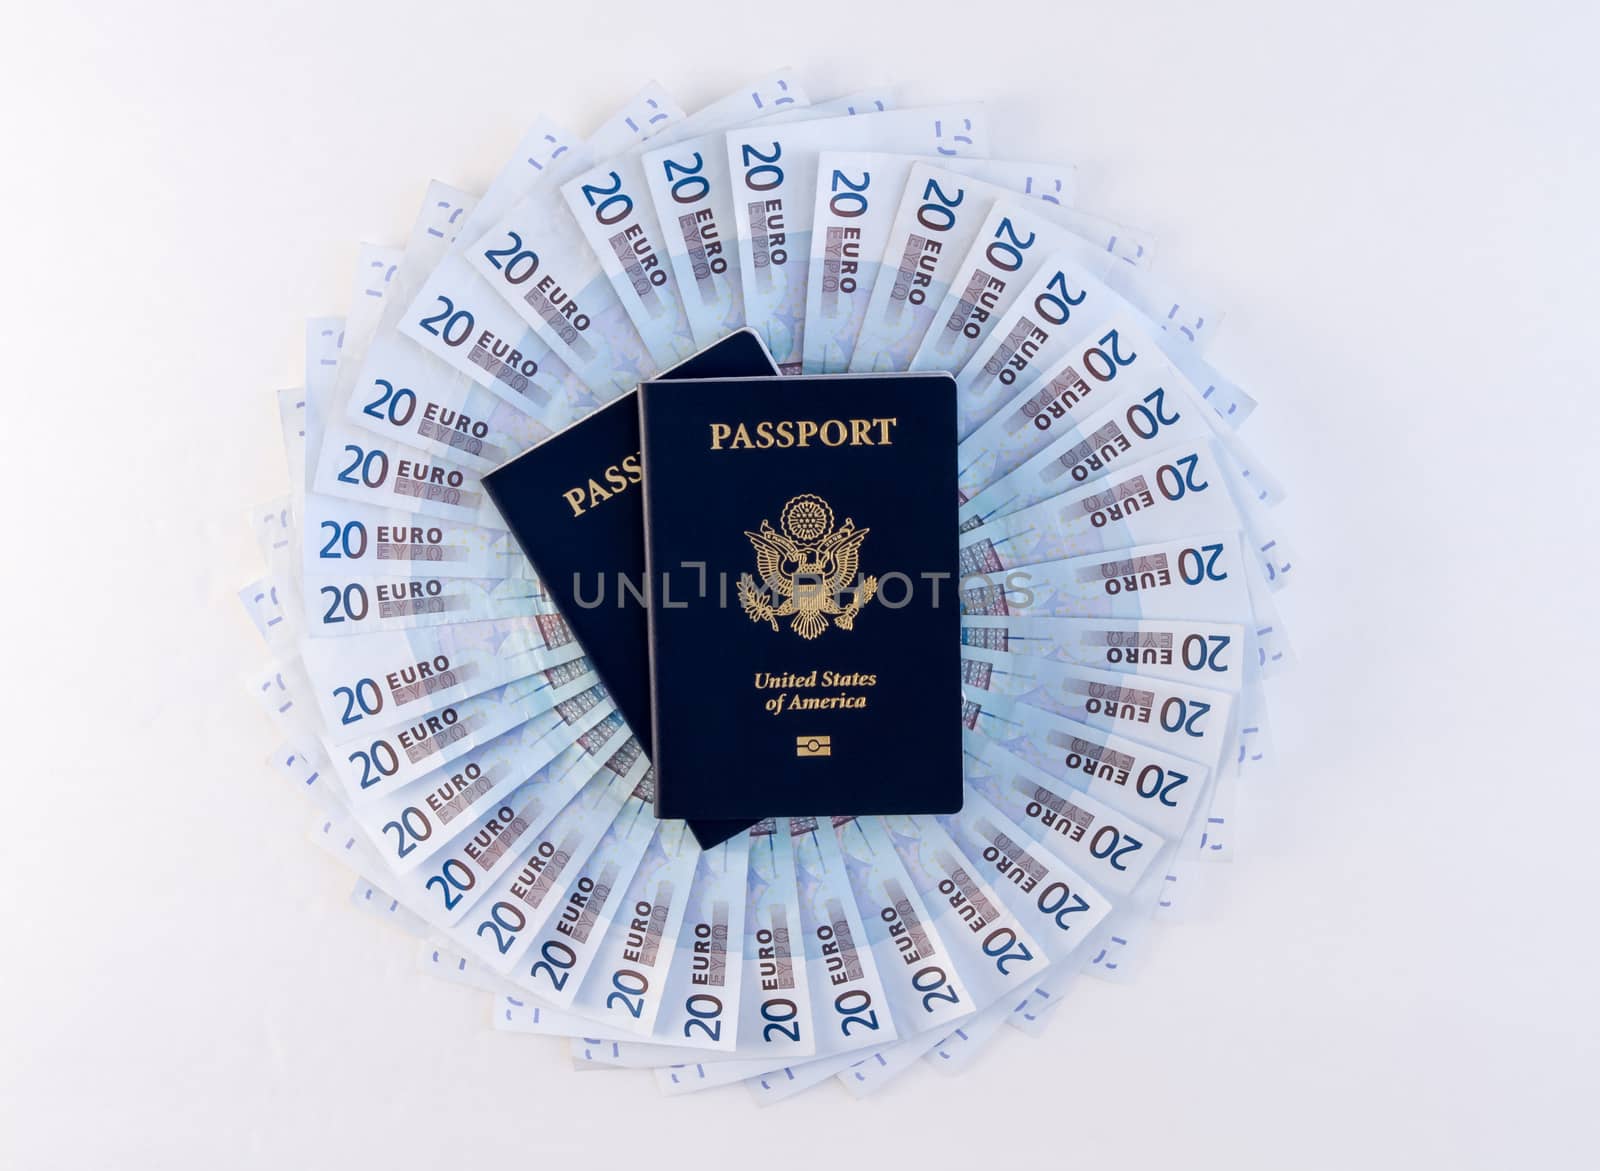 Travel scene with circular fan of Euros (20's) and two passports